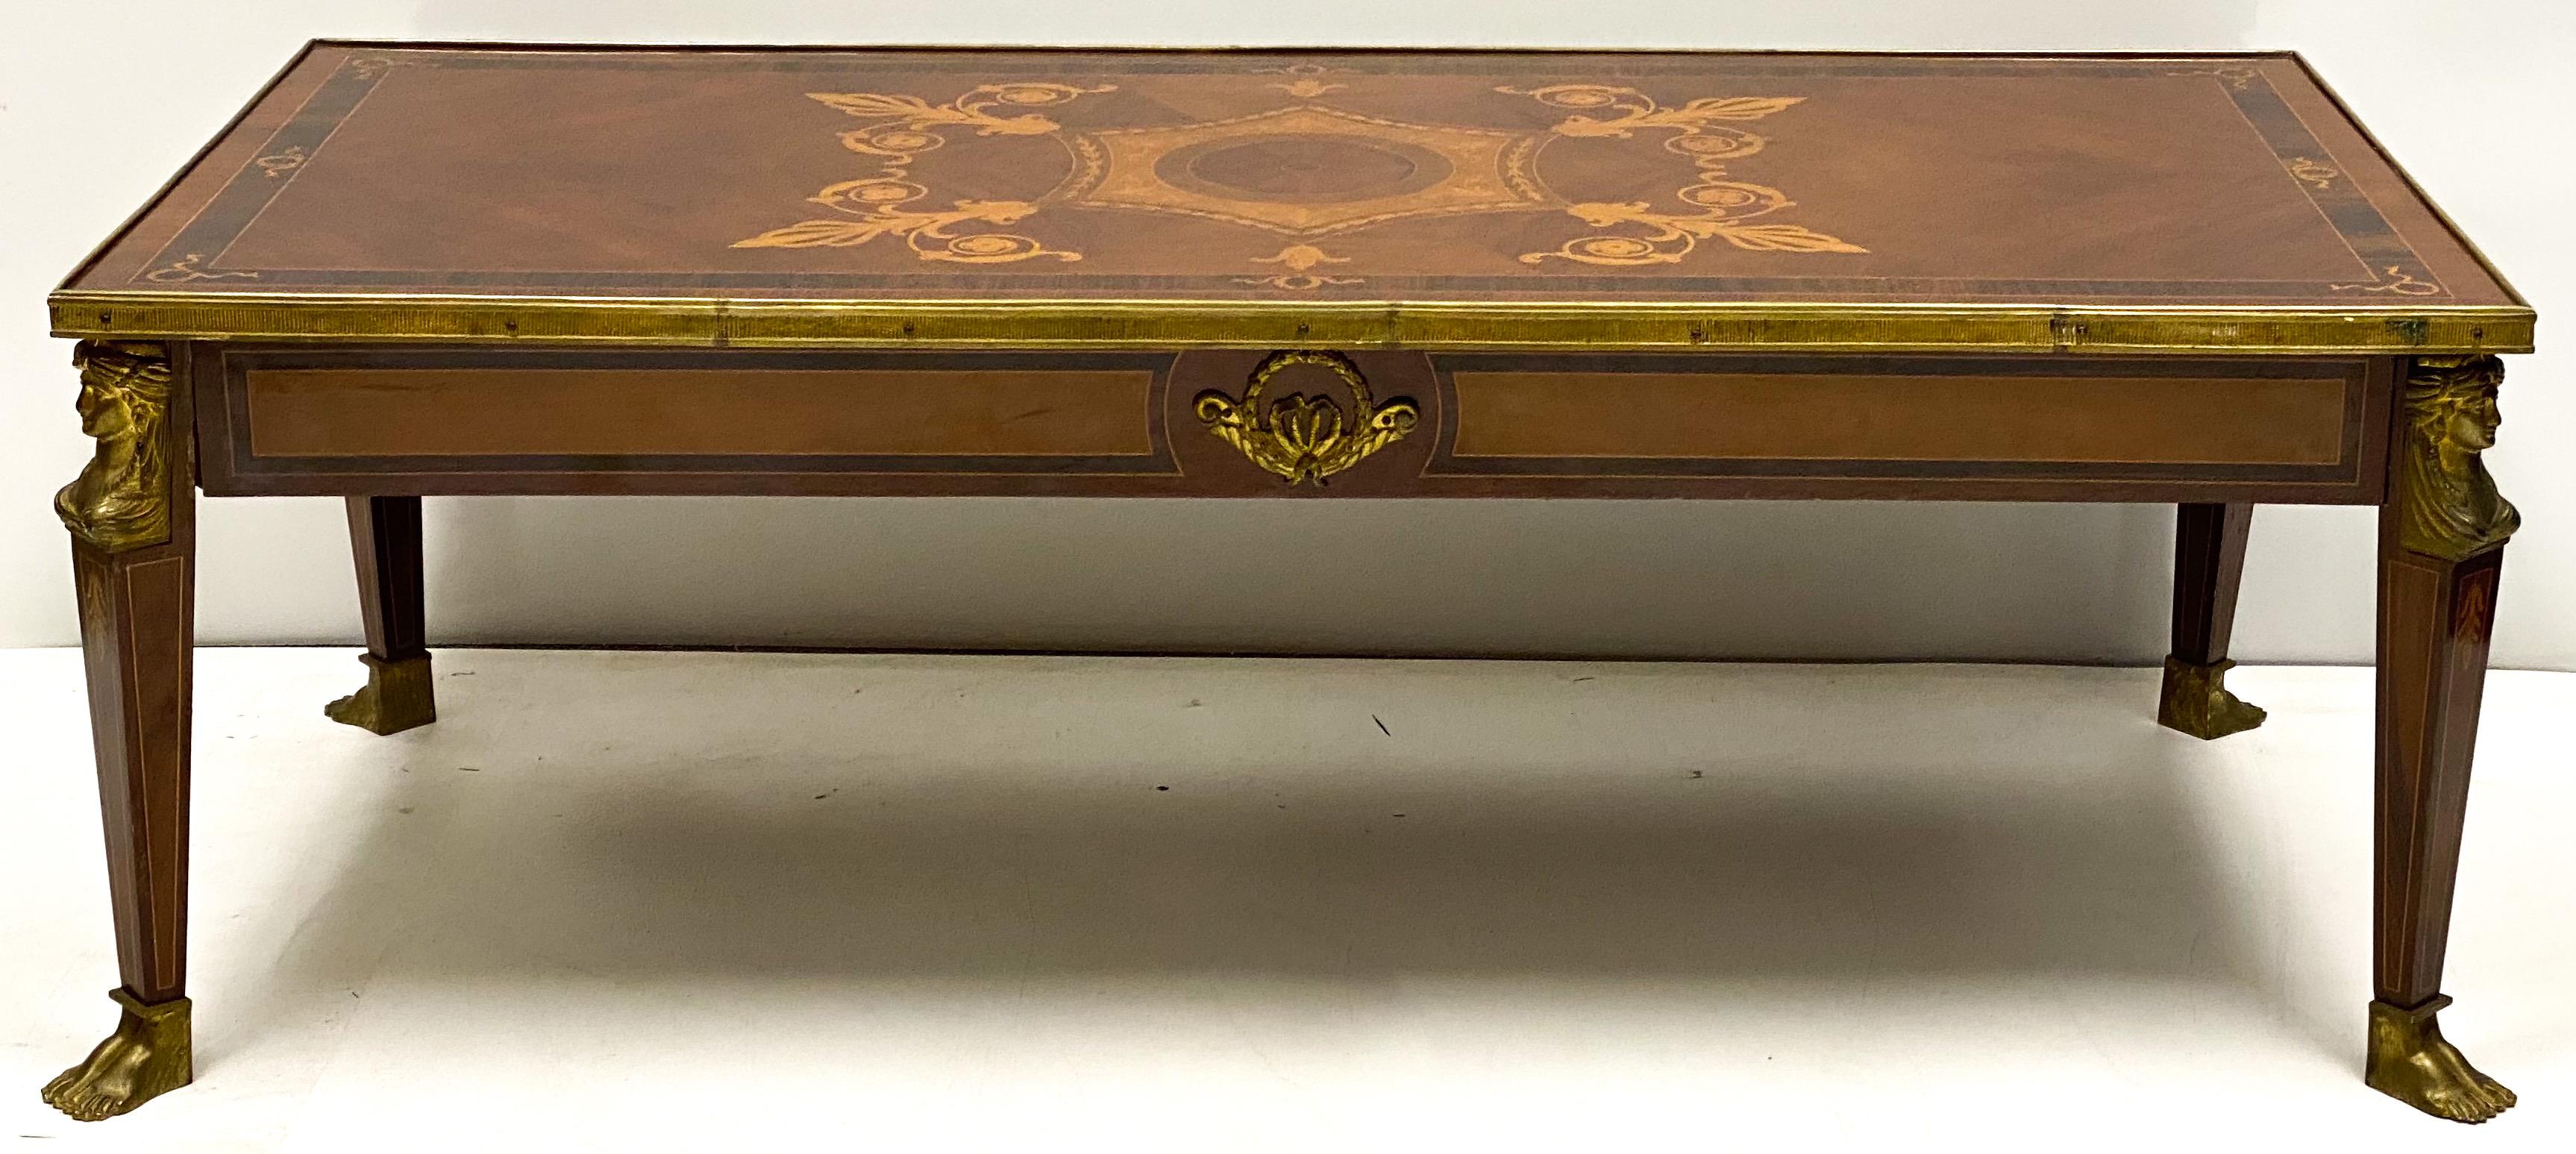 This is a neoclassical style French inlaid coffee table with bronze mounts. It is not marked and in very good condition. The woods are mahogany and satinwoods.